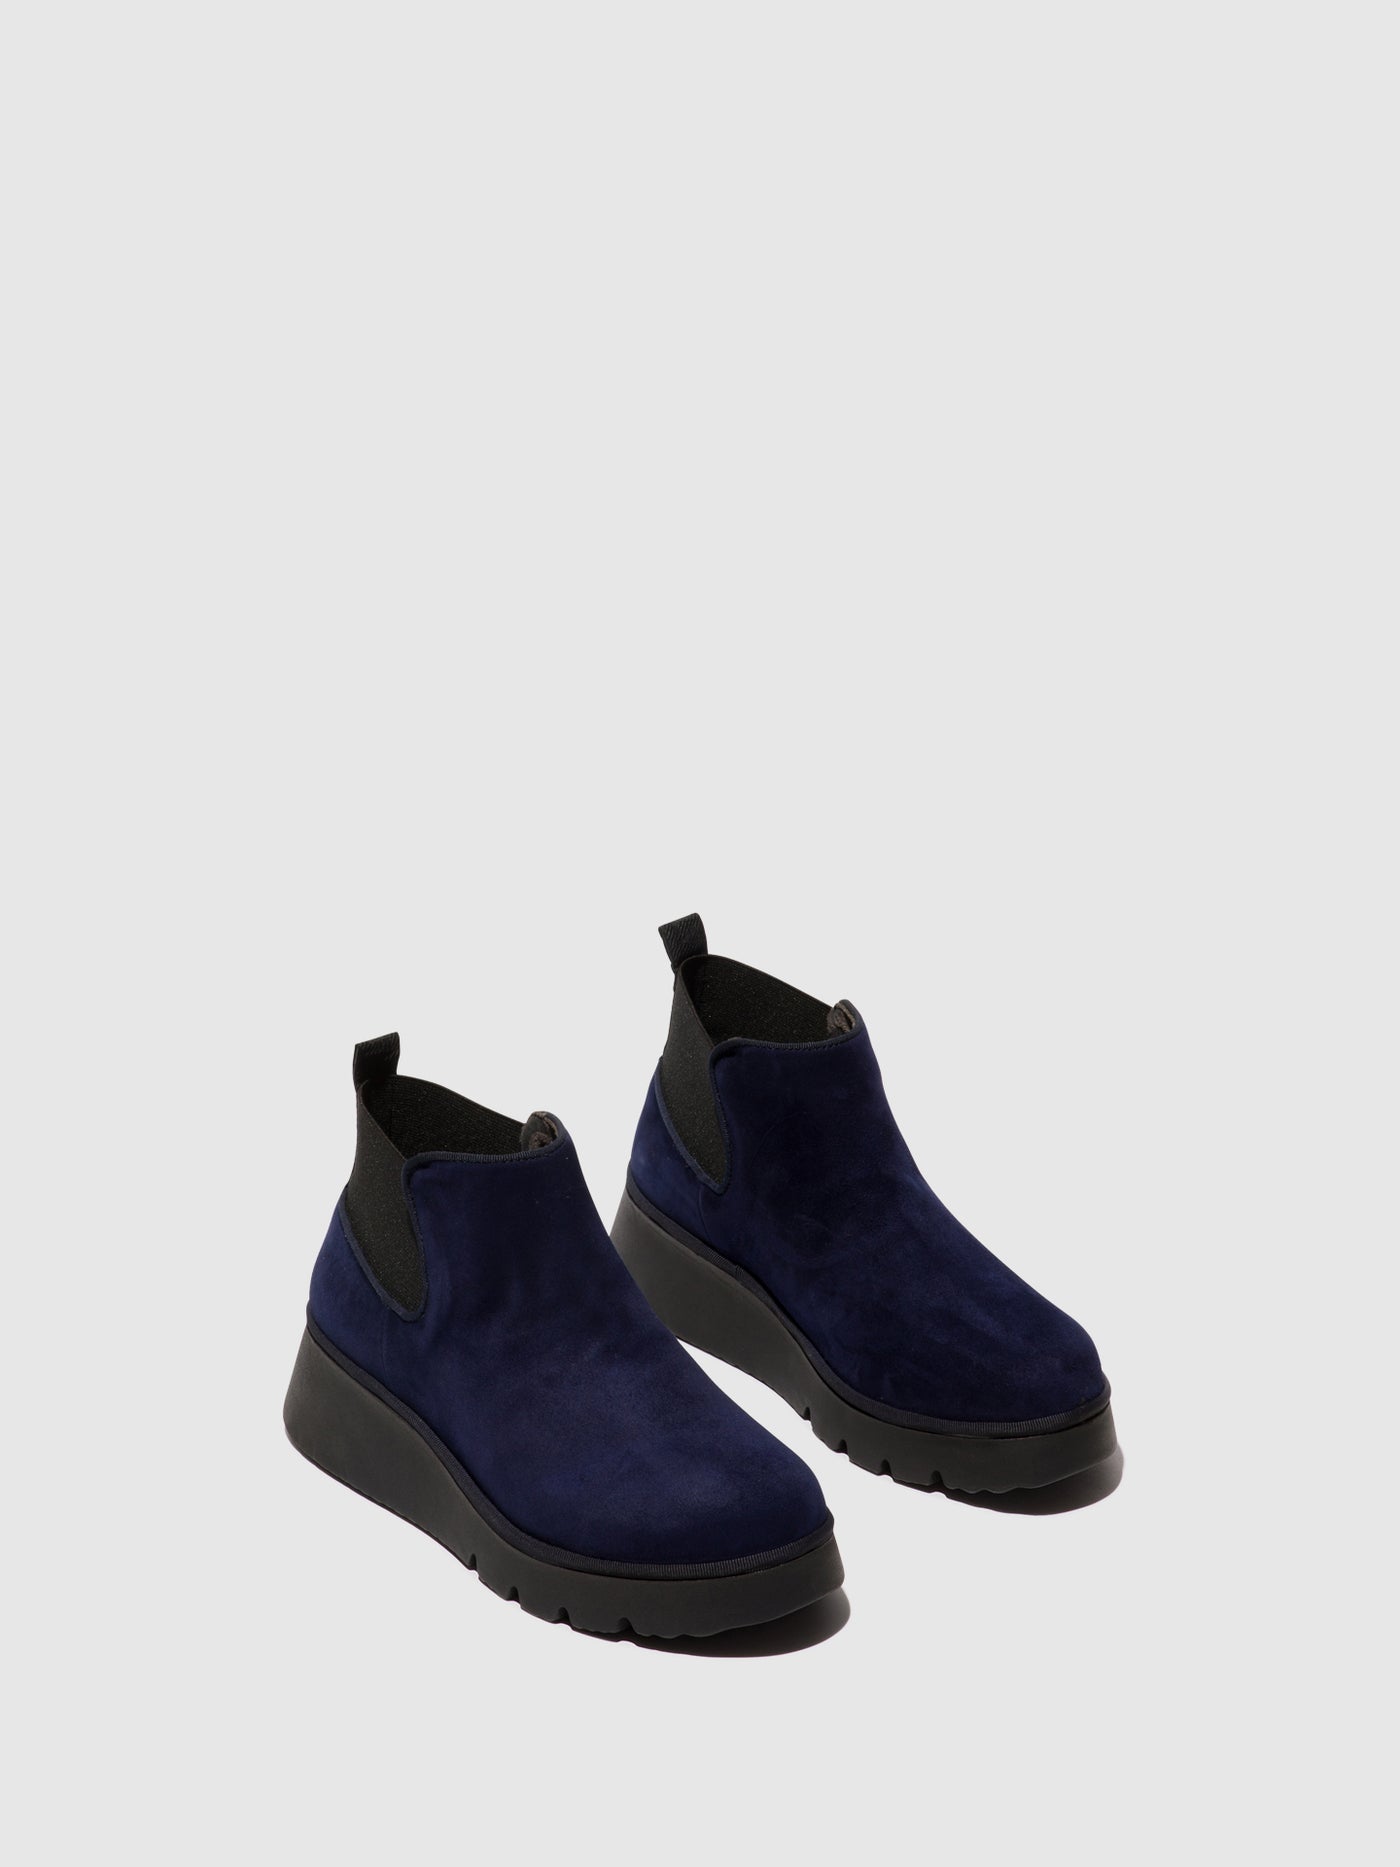 Elasticated Ankle Boots PADA403FLY NAVY